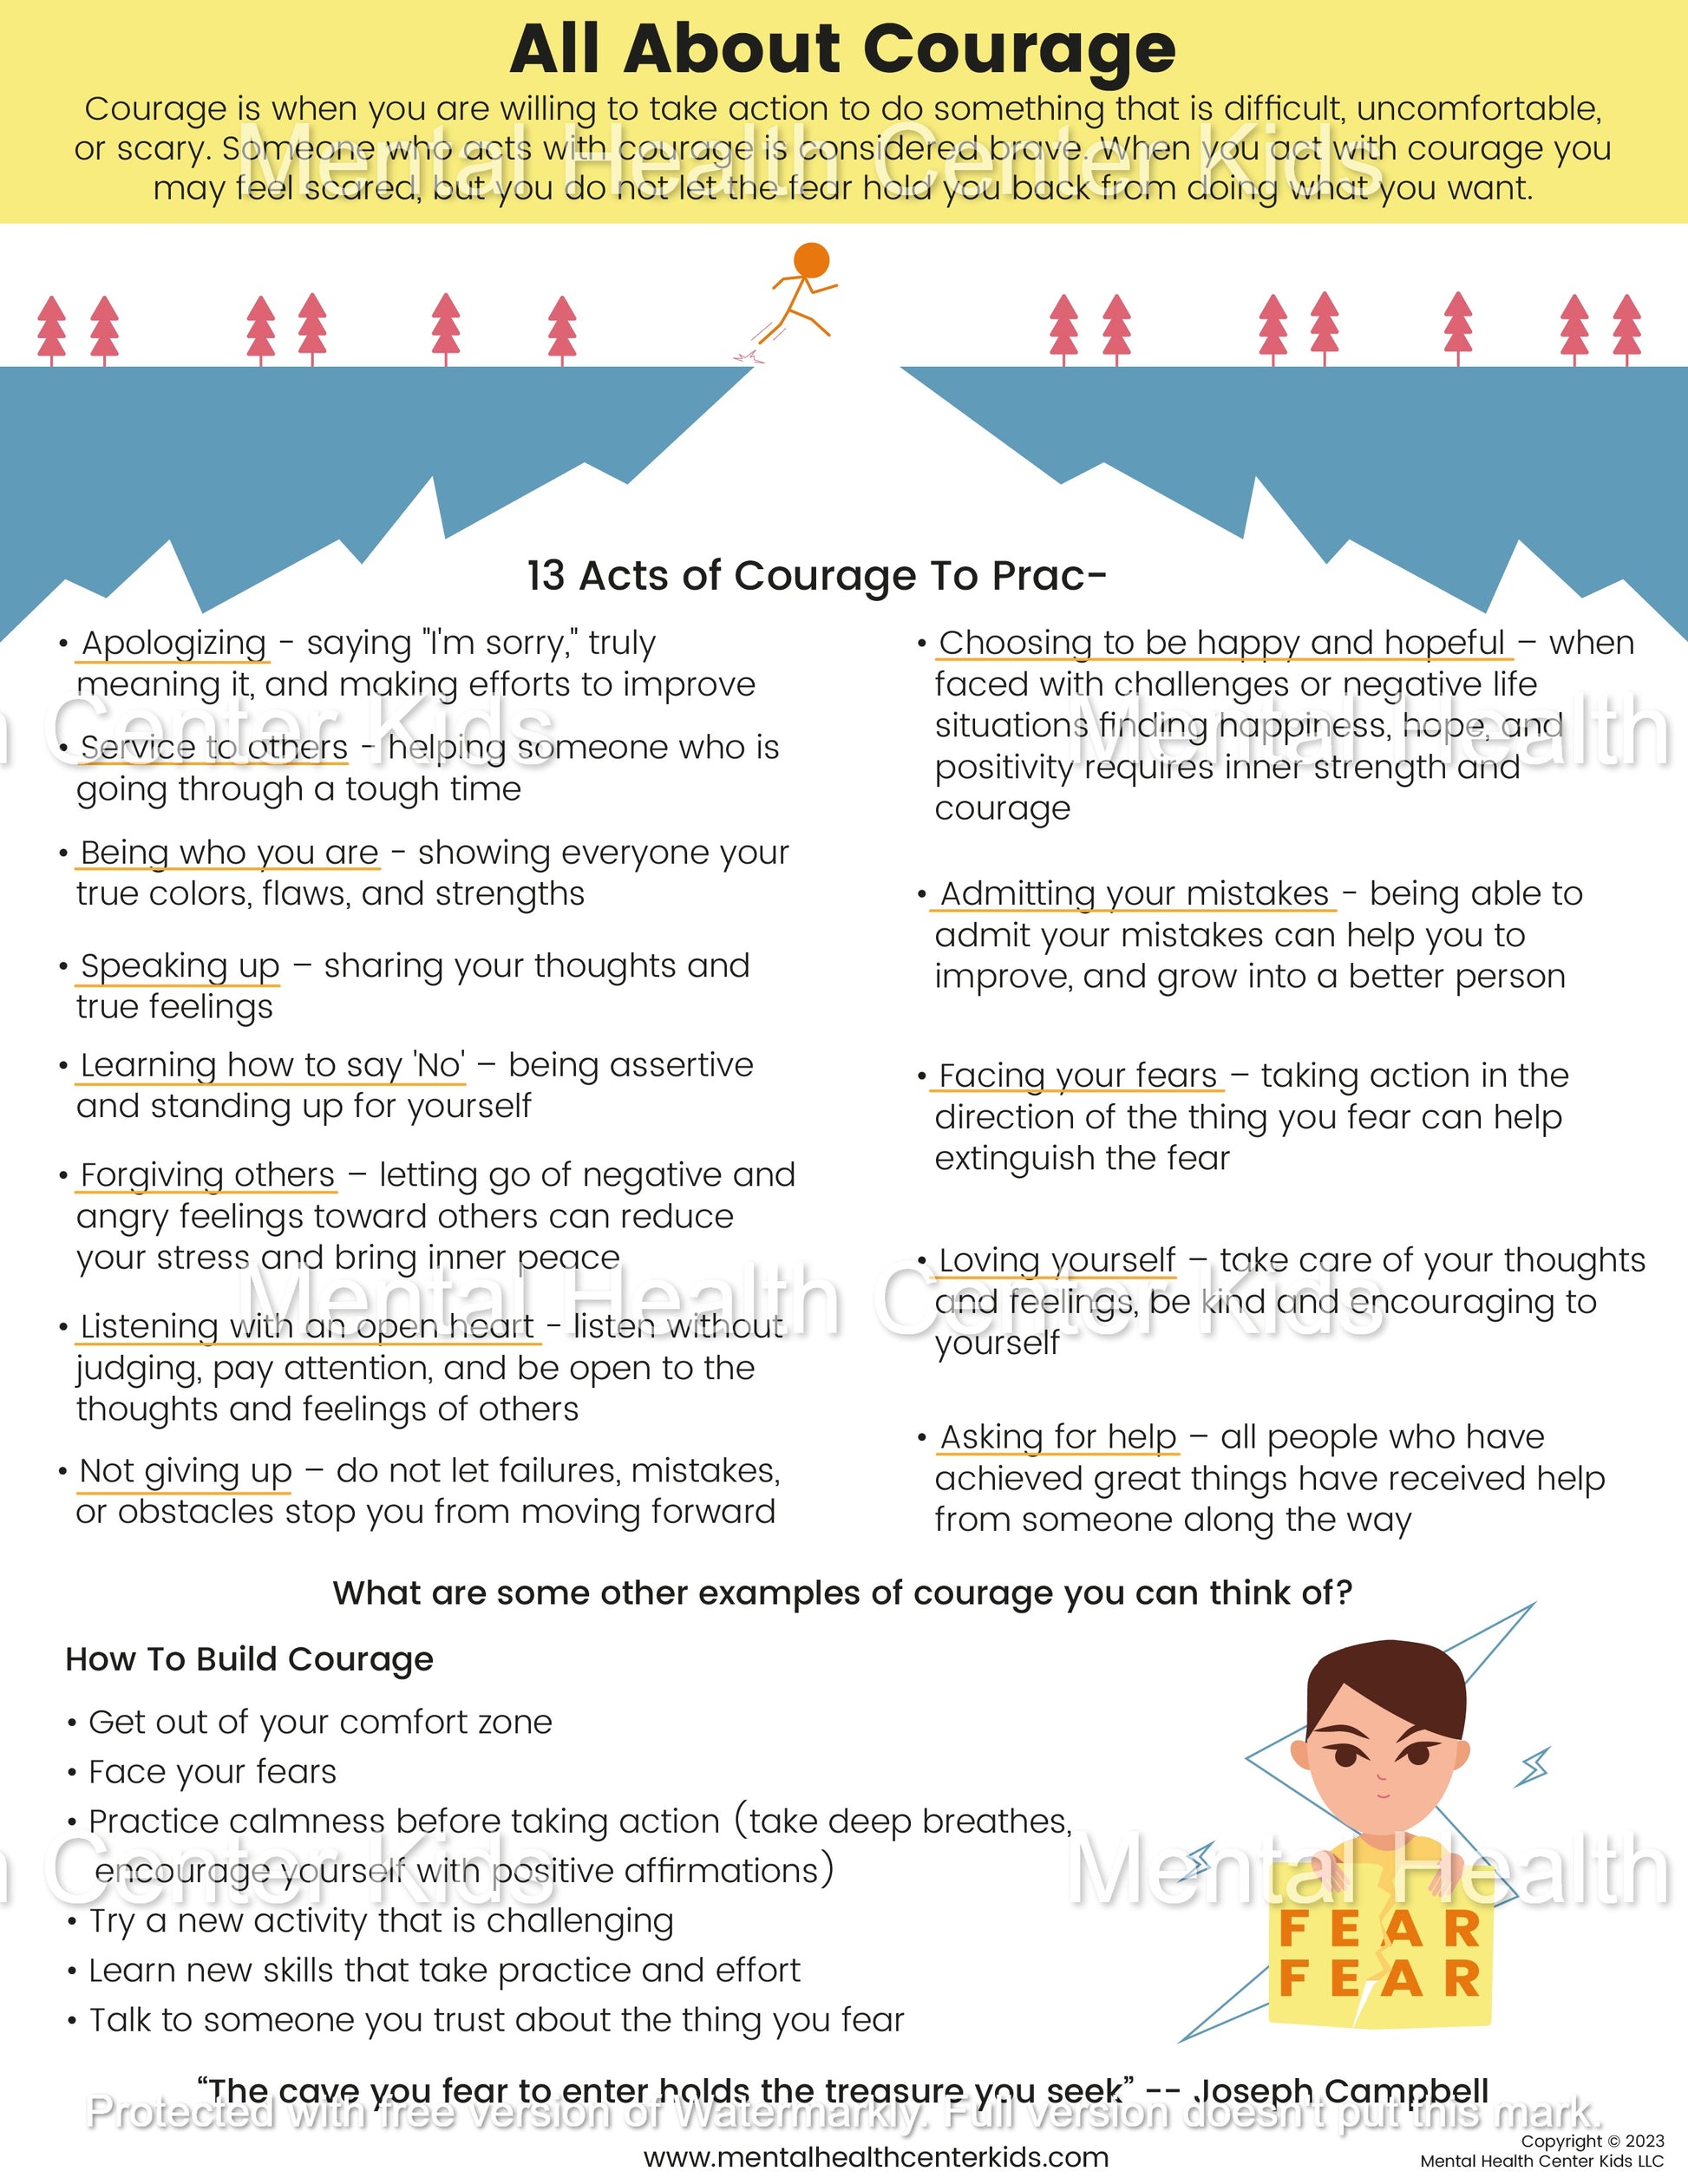 All About Courage – Mental Health Center Kids